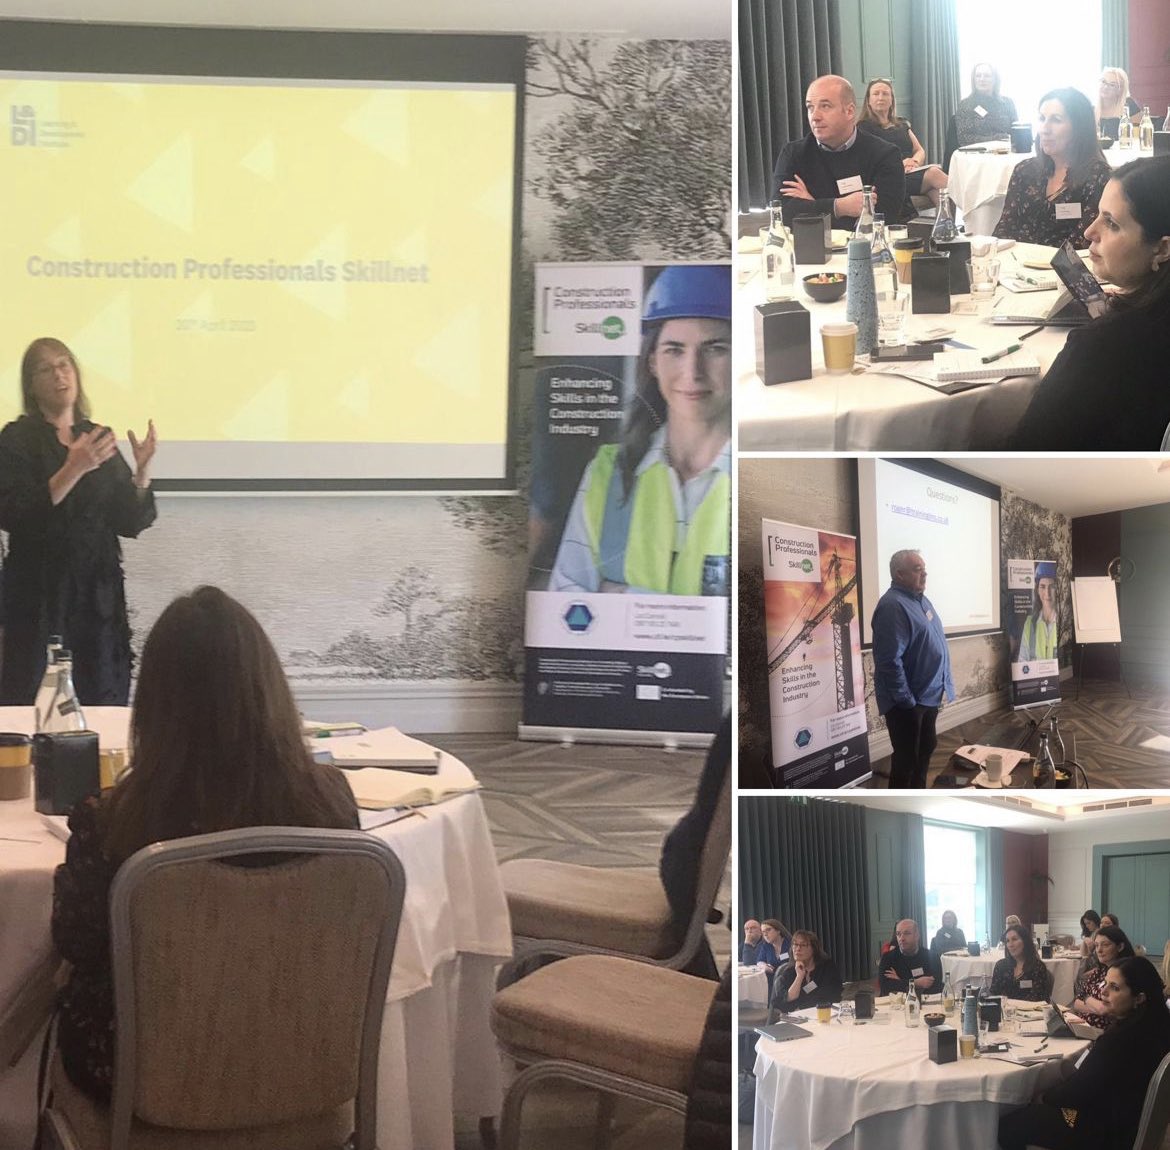 A great turnout for our Information and Networking event for Construction Training Managers in @Cknock_Hotel yesterday! 📚 

#construction #skills #HR #Training 
@ArdmacLtd @CIF_Ireland @SkillnetIreland @CollenConstruct @PJHegartySons @mercuryeng @JohnSiskandSon